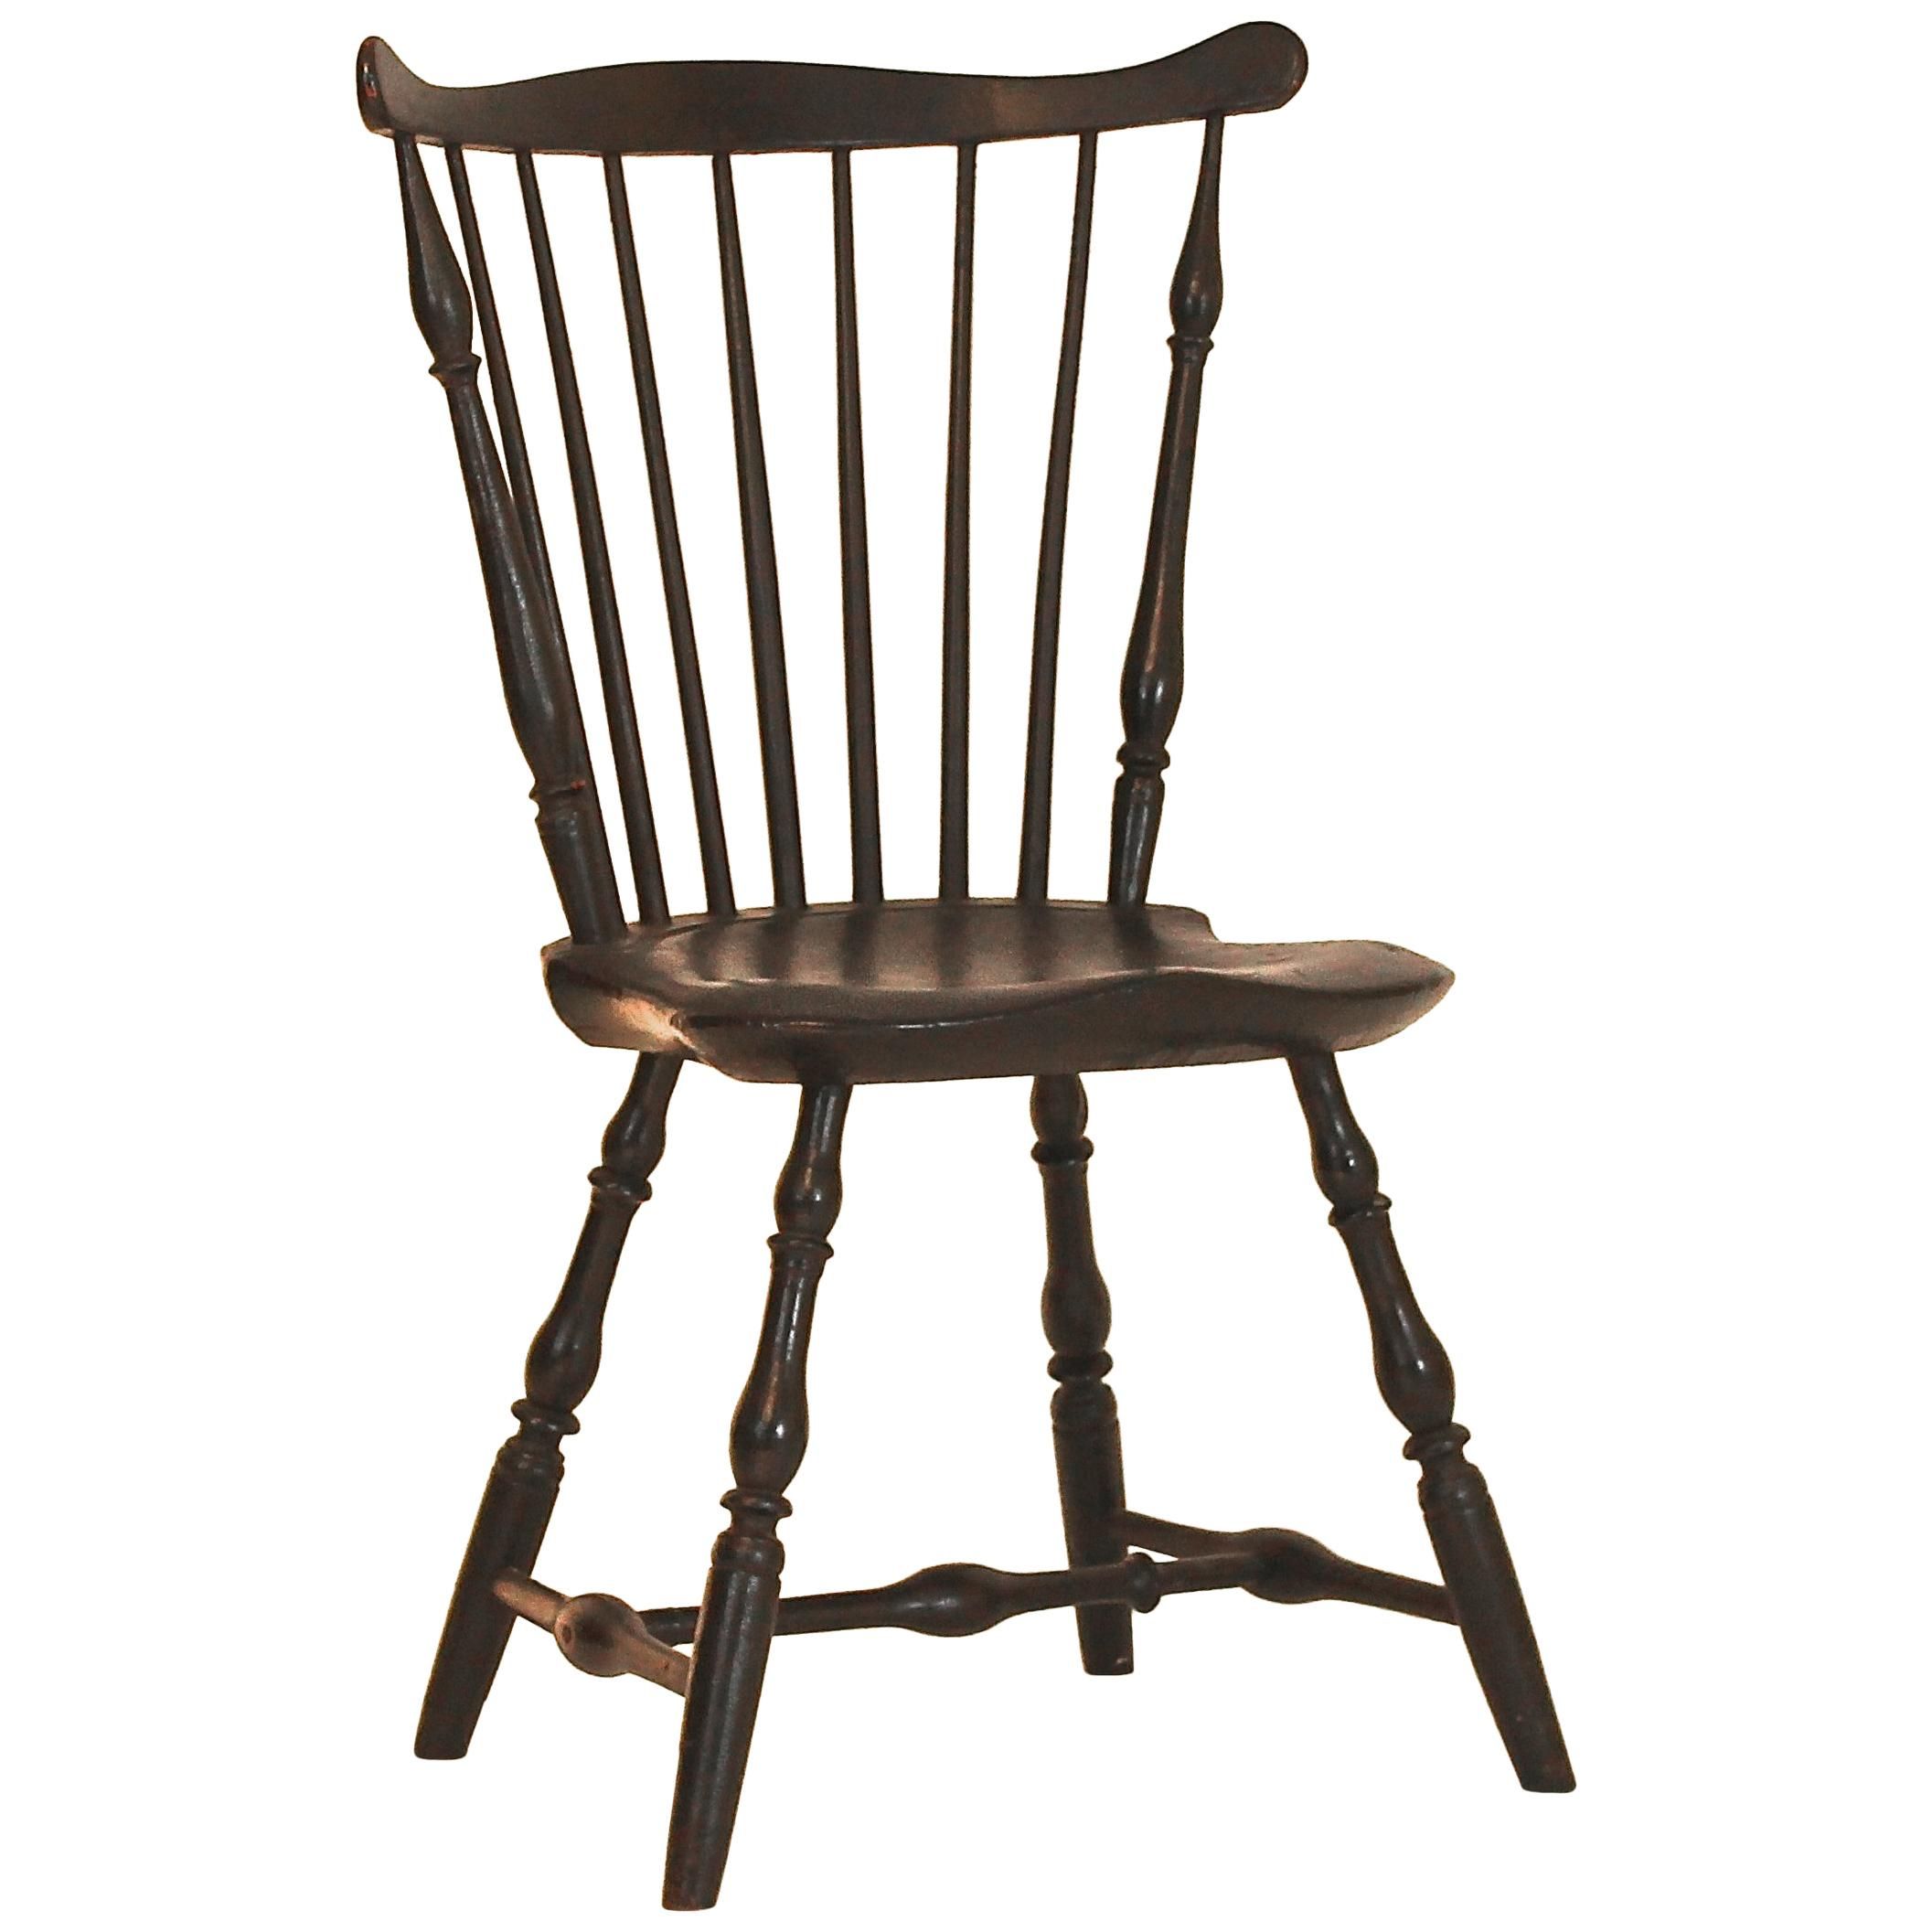 Antique And Vintage Windsor Chairs – 182 For Sale At 1stdibs With Regard To Black Back Windsor Rocking Chairs (View 10 of 20)